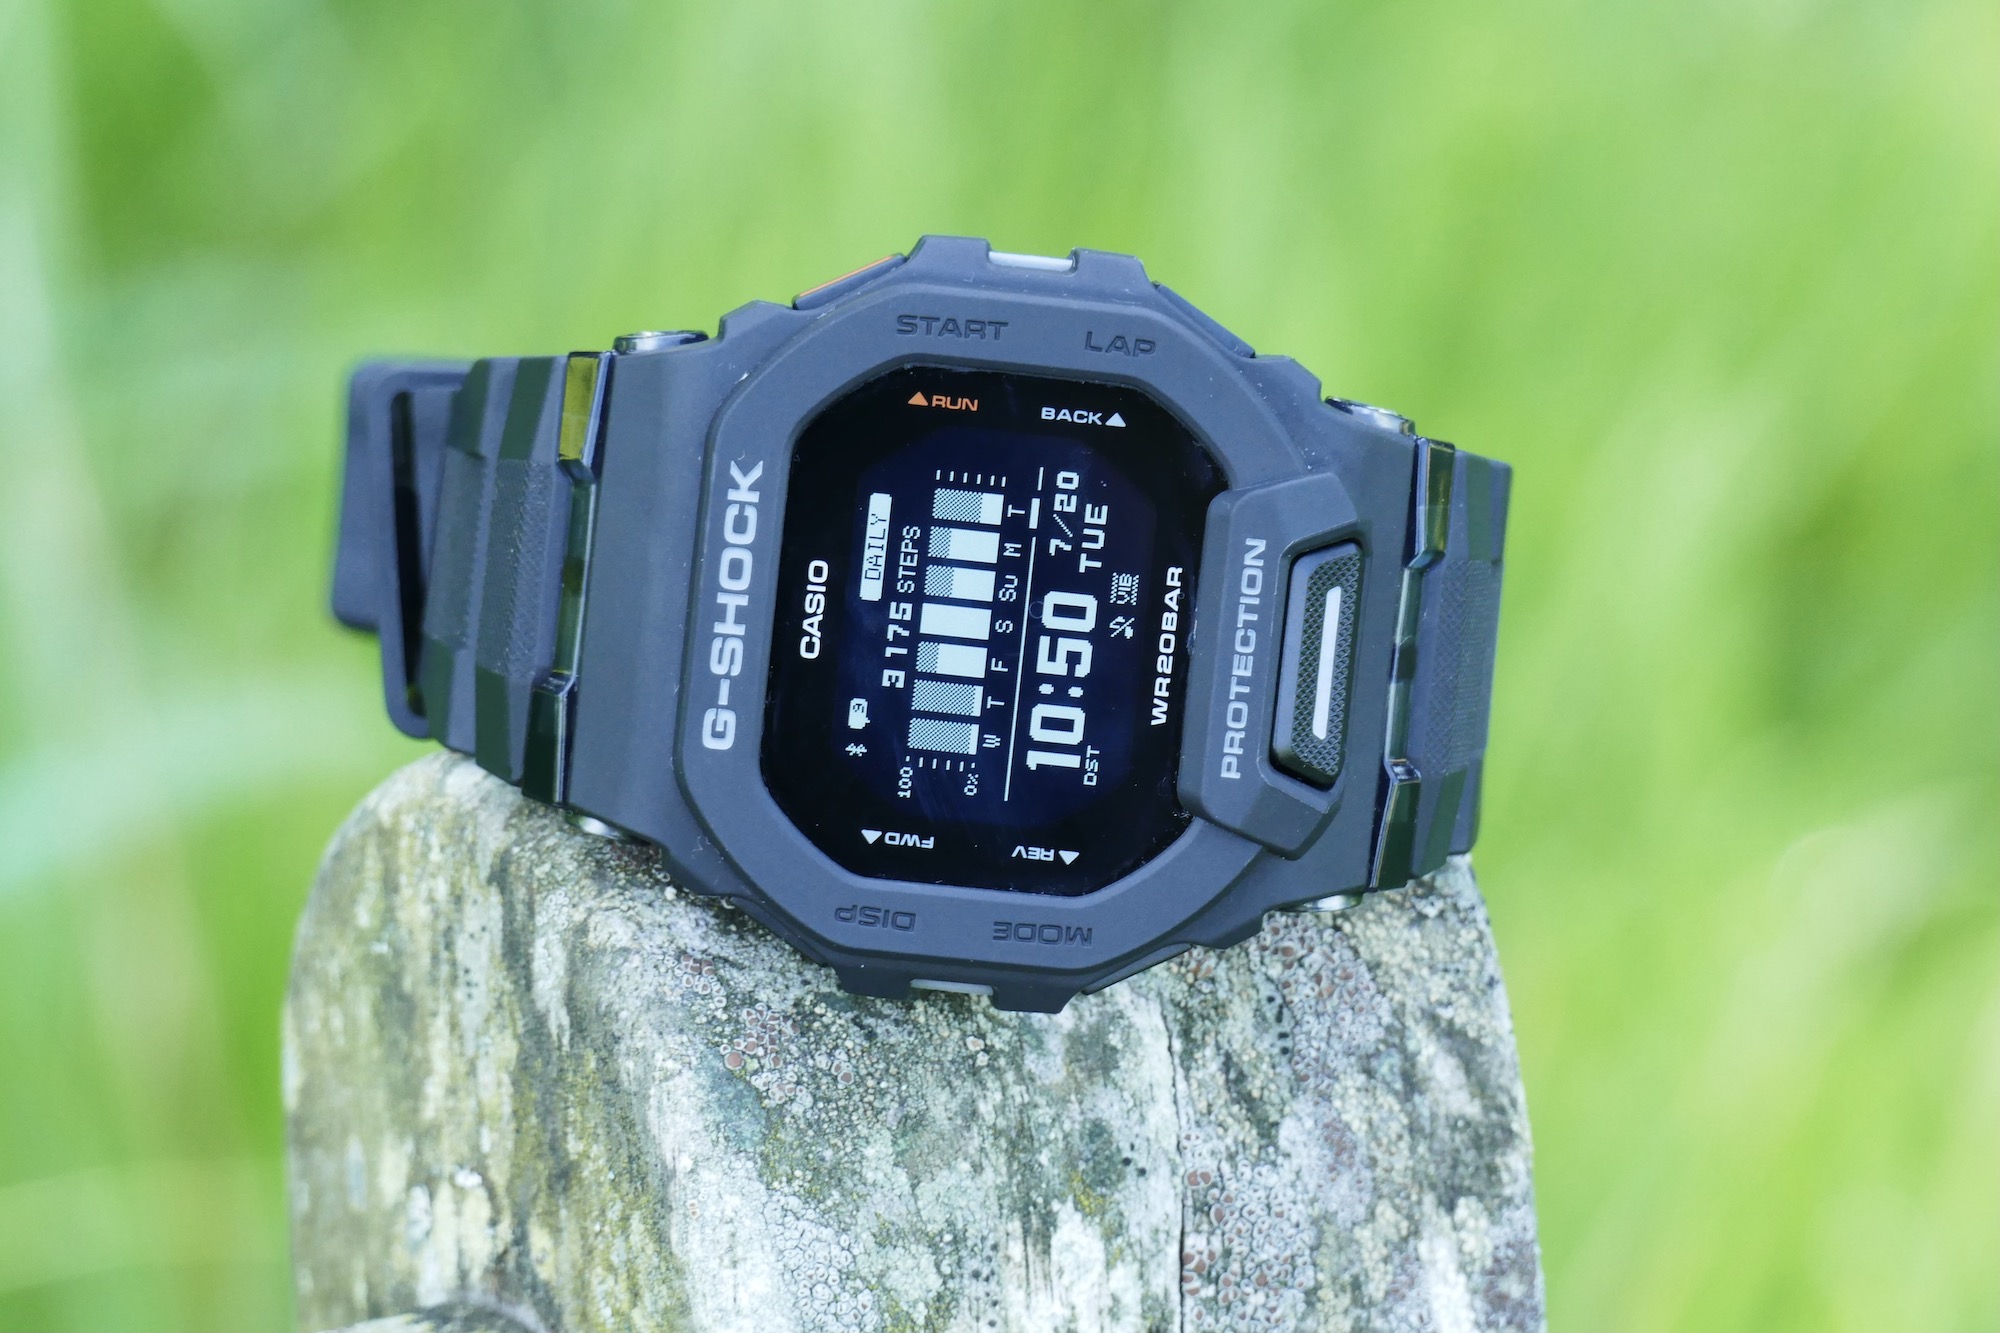 Casio G-Shock GBD-200 Digital Balanced | Perfectly Review: Trends